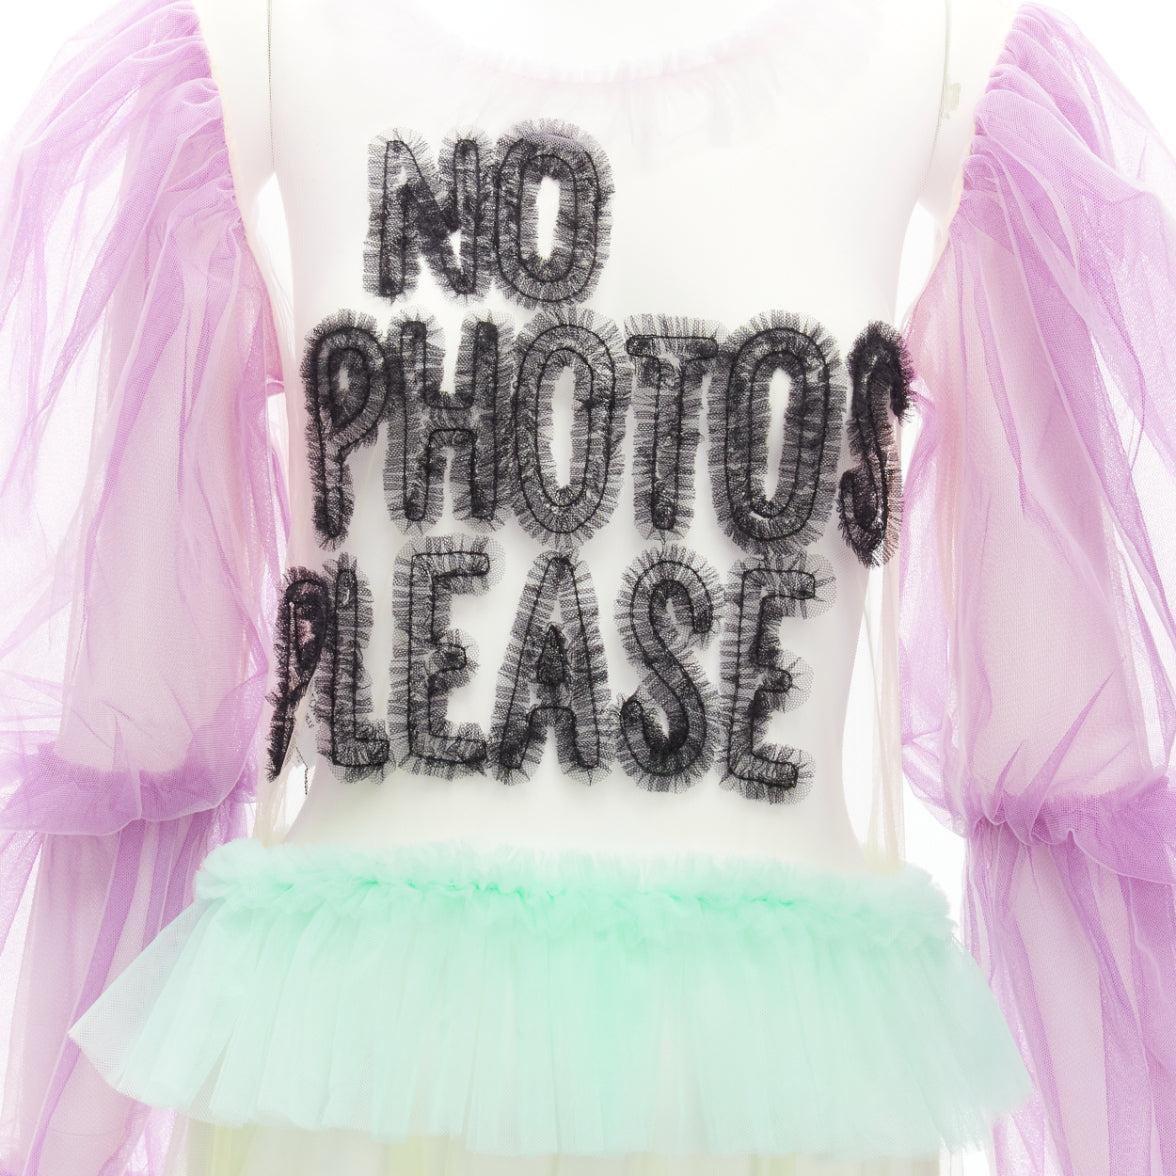 VIKTOR ROLF 2019 TULLE No Photos Please black ruffle pastel puff sleeves sheer dress M
Reference: TGAS/D00646
Brand: Viktor Rolf
Model: No Photos Please
Collection: 2019
Material: Tulle
Color: Purple, Green
Pattern: Solid
Closure: Pullover
Made in: